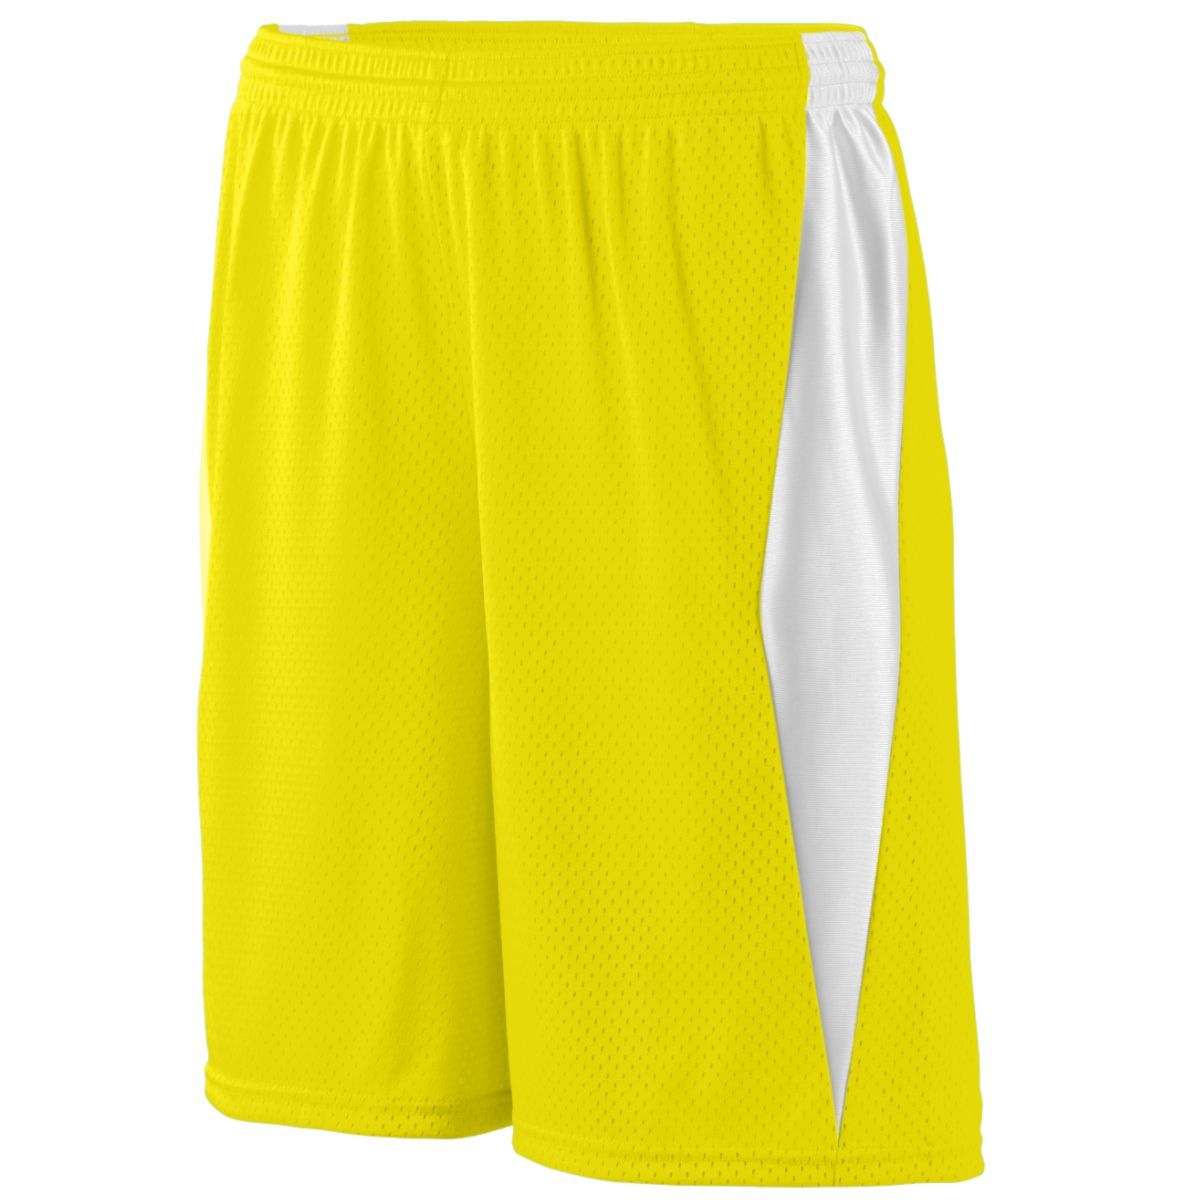 Augusta Sportswear Top Score Shorts in Power Yellow/White  -Part of the Adult, Adult-Shorts, Augusta-Products, Lacrosse, All-Sports, All-Sports-1 product lines at KanaleyCreations.com